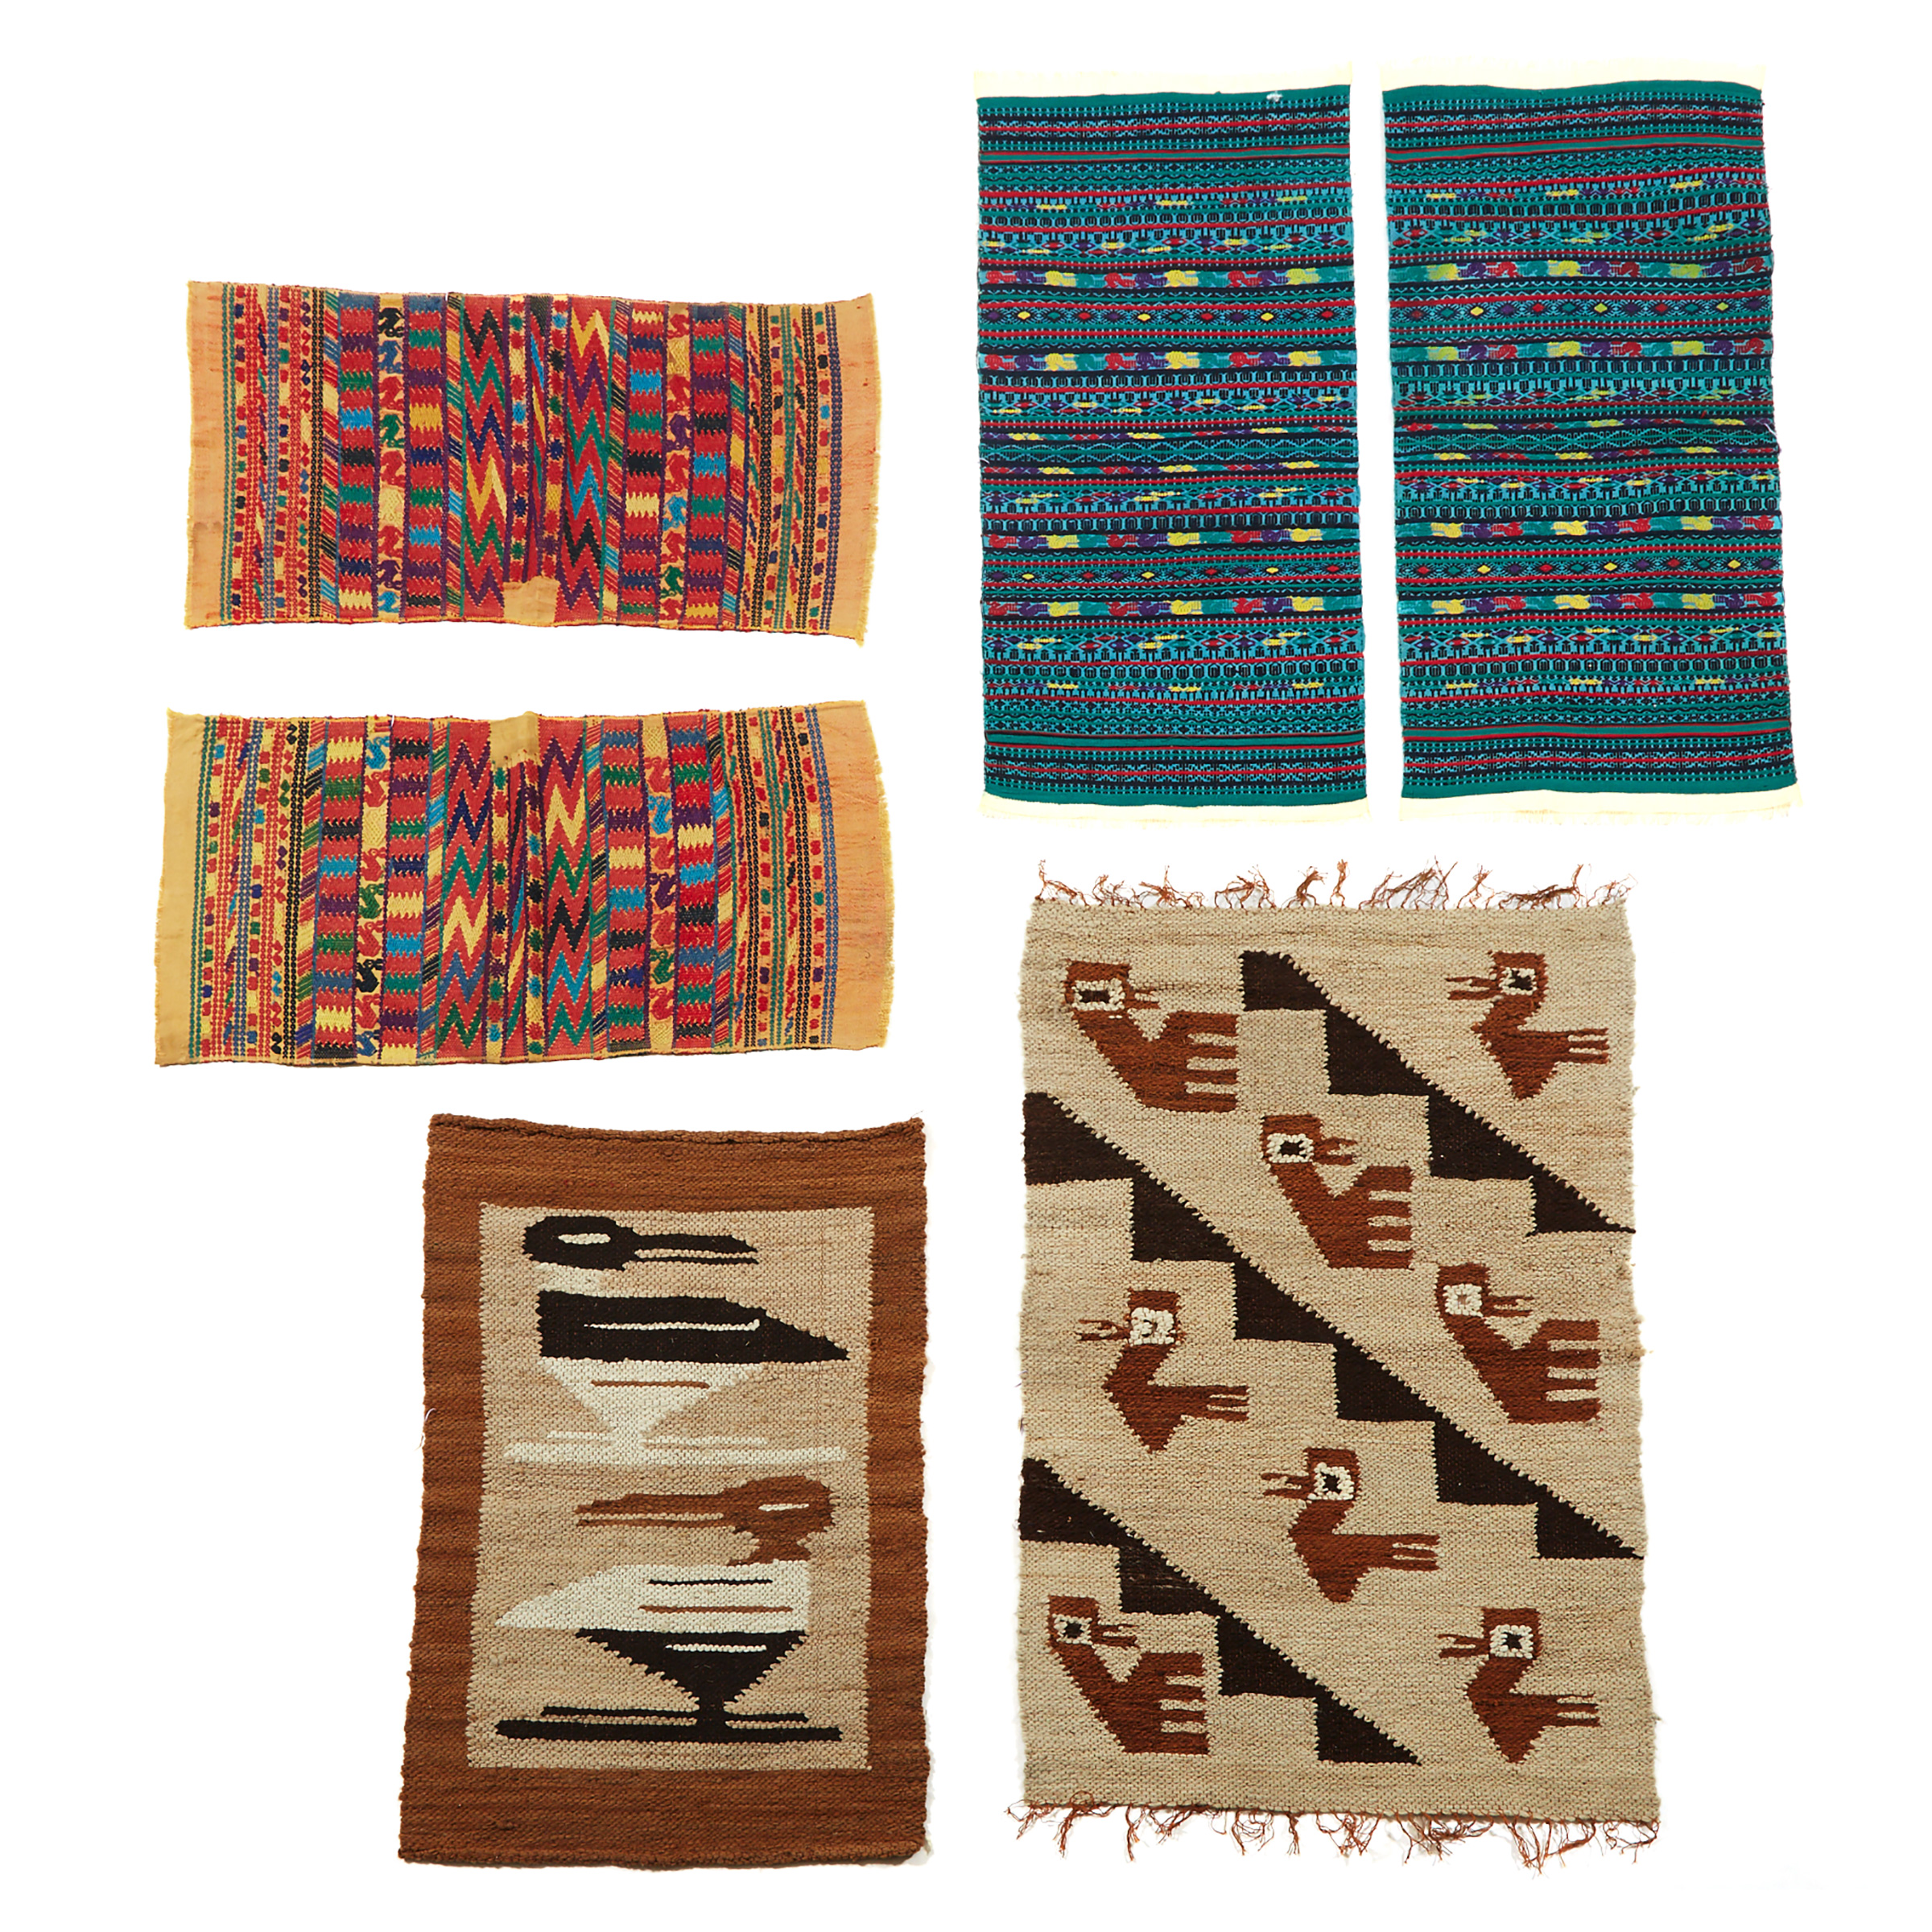 Group of Six Central American Textiles including two Peruvian Kelims